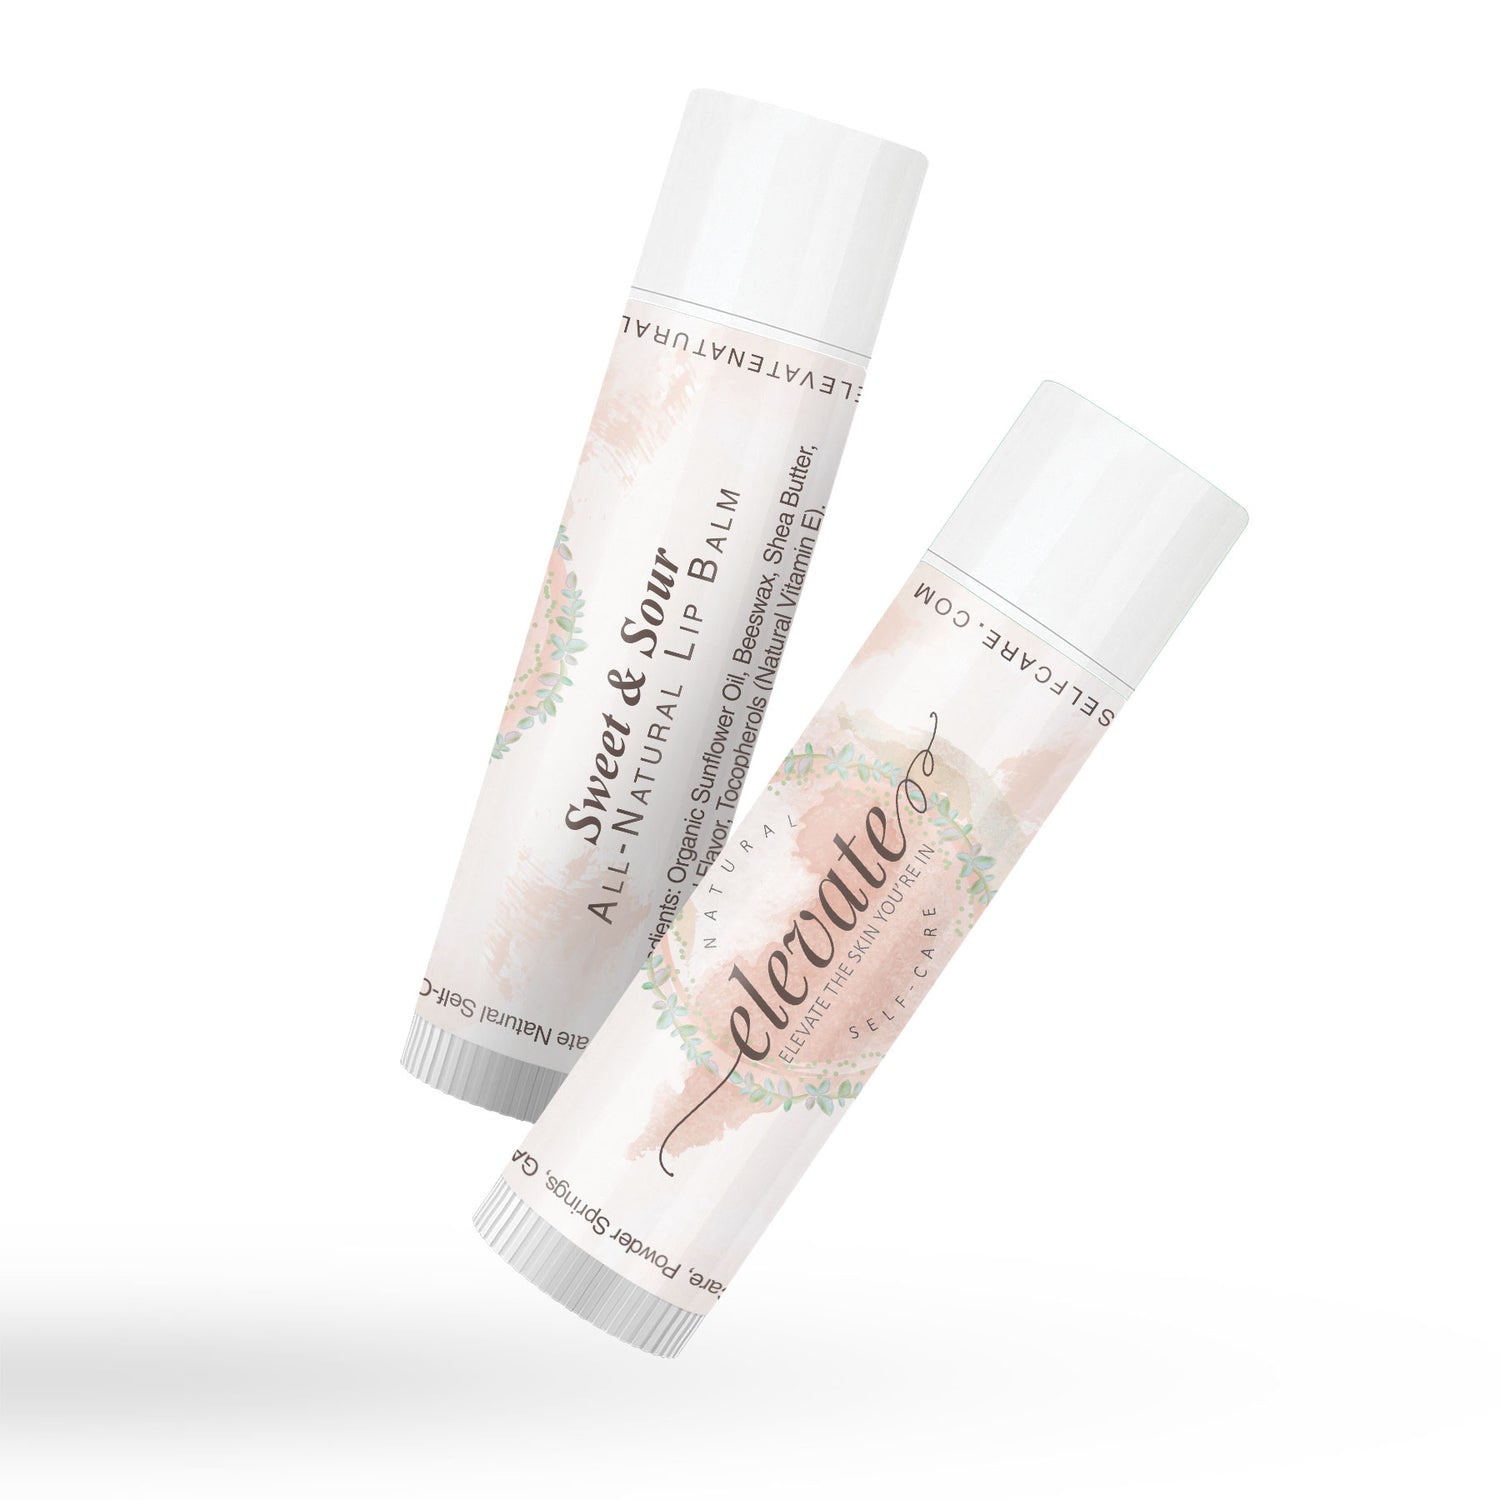 Sweet and Sour All-Natural Lip Balm will naturally revitalize lips with our long-lasting conditioning lip balm made with sustainable and locally sourced beeswax, moisturizing shea butter, sunflower oil, and vitamin E oil with a deliciously sweet and citrusy-scented flavor oil. 